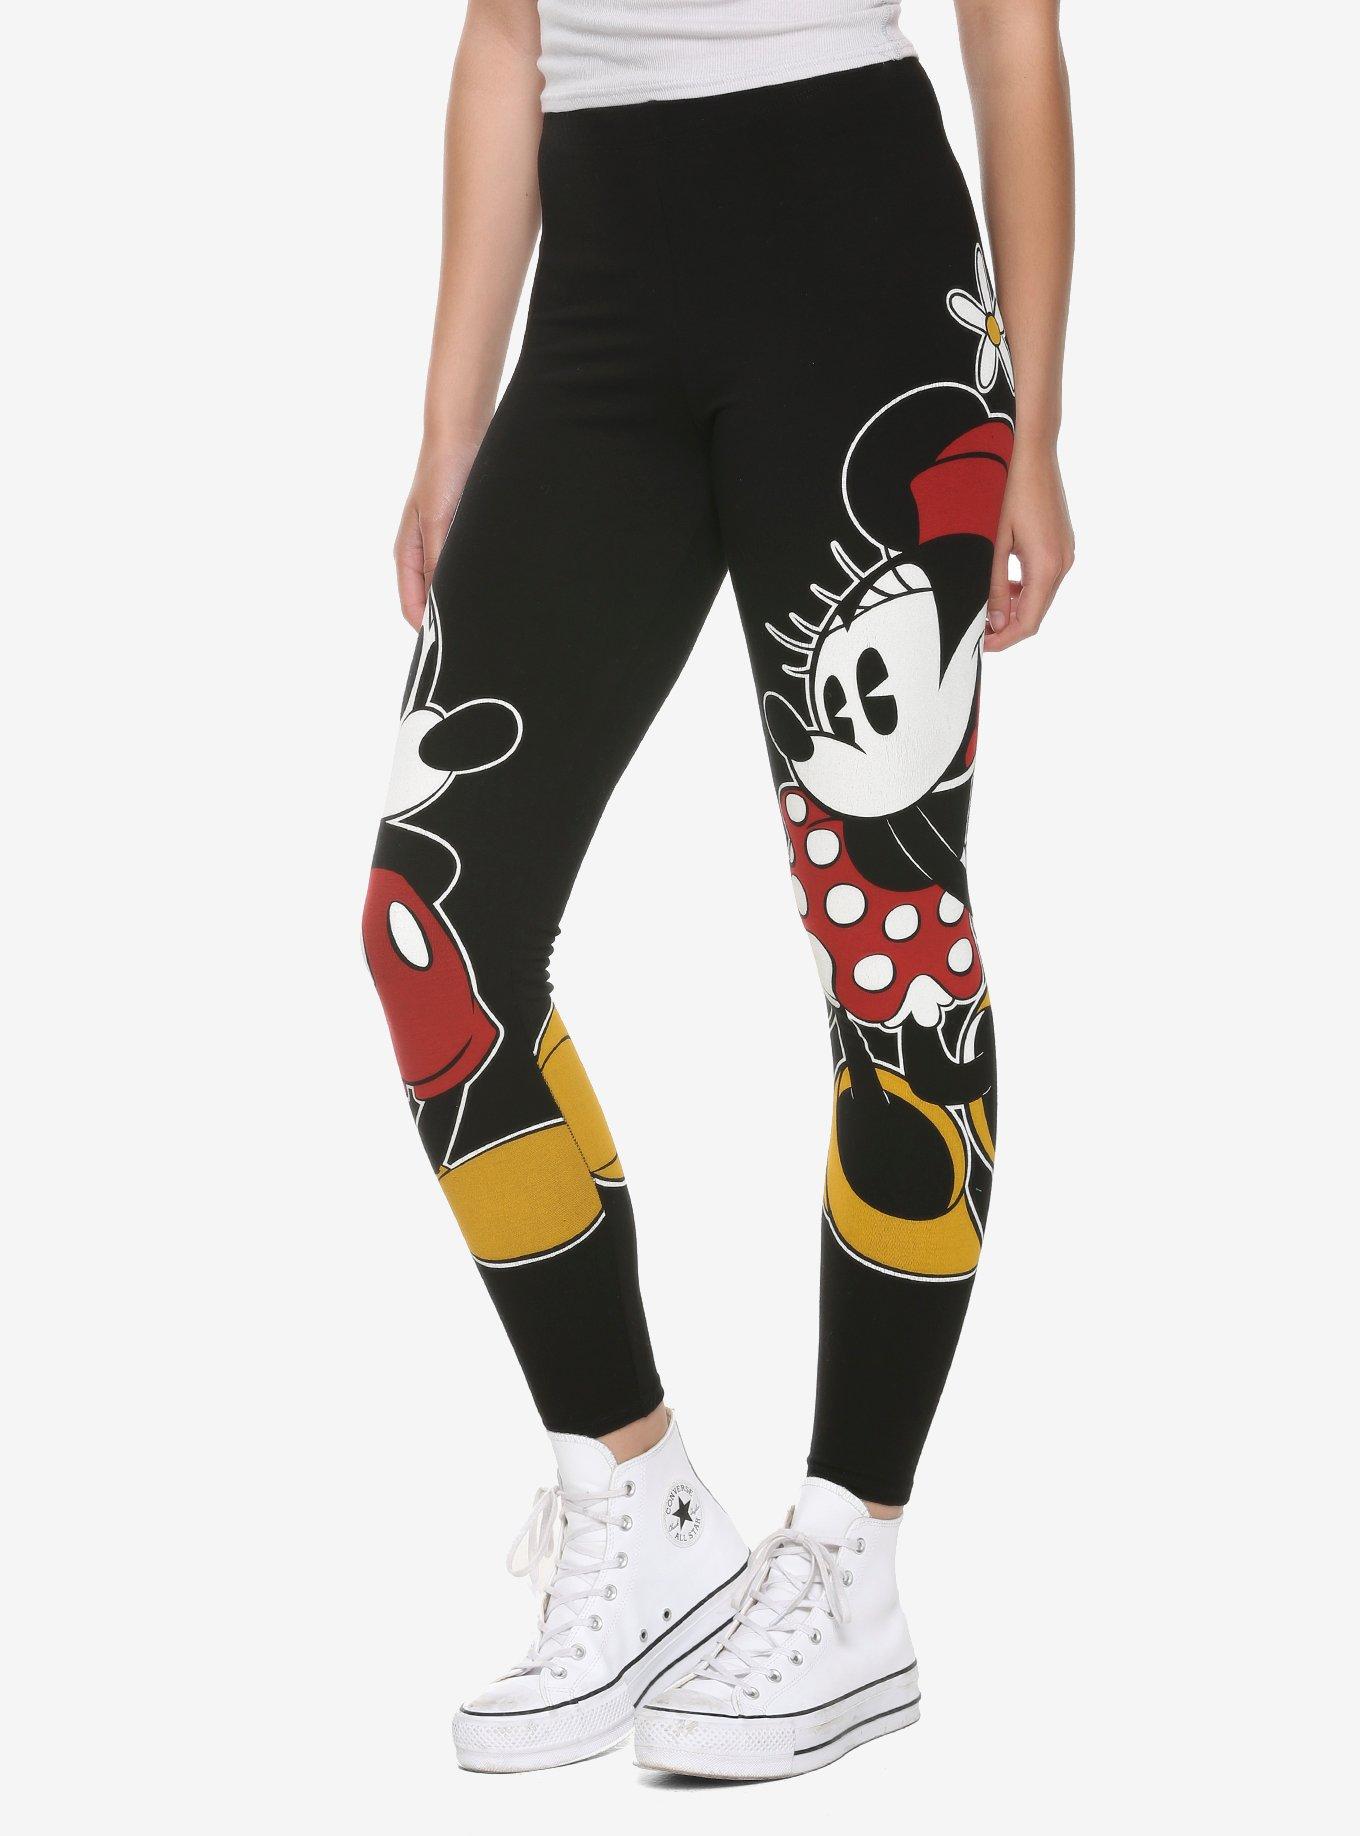 Disney Mickey Mouse and Friends runDisney Leggings for Women — Double Boxed  Toys